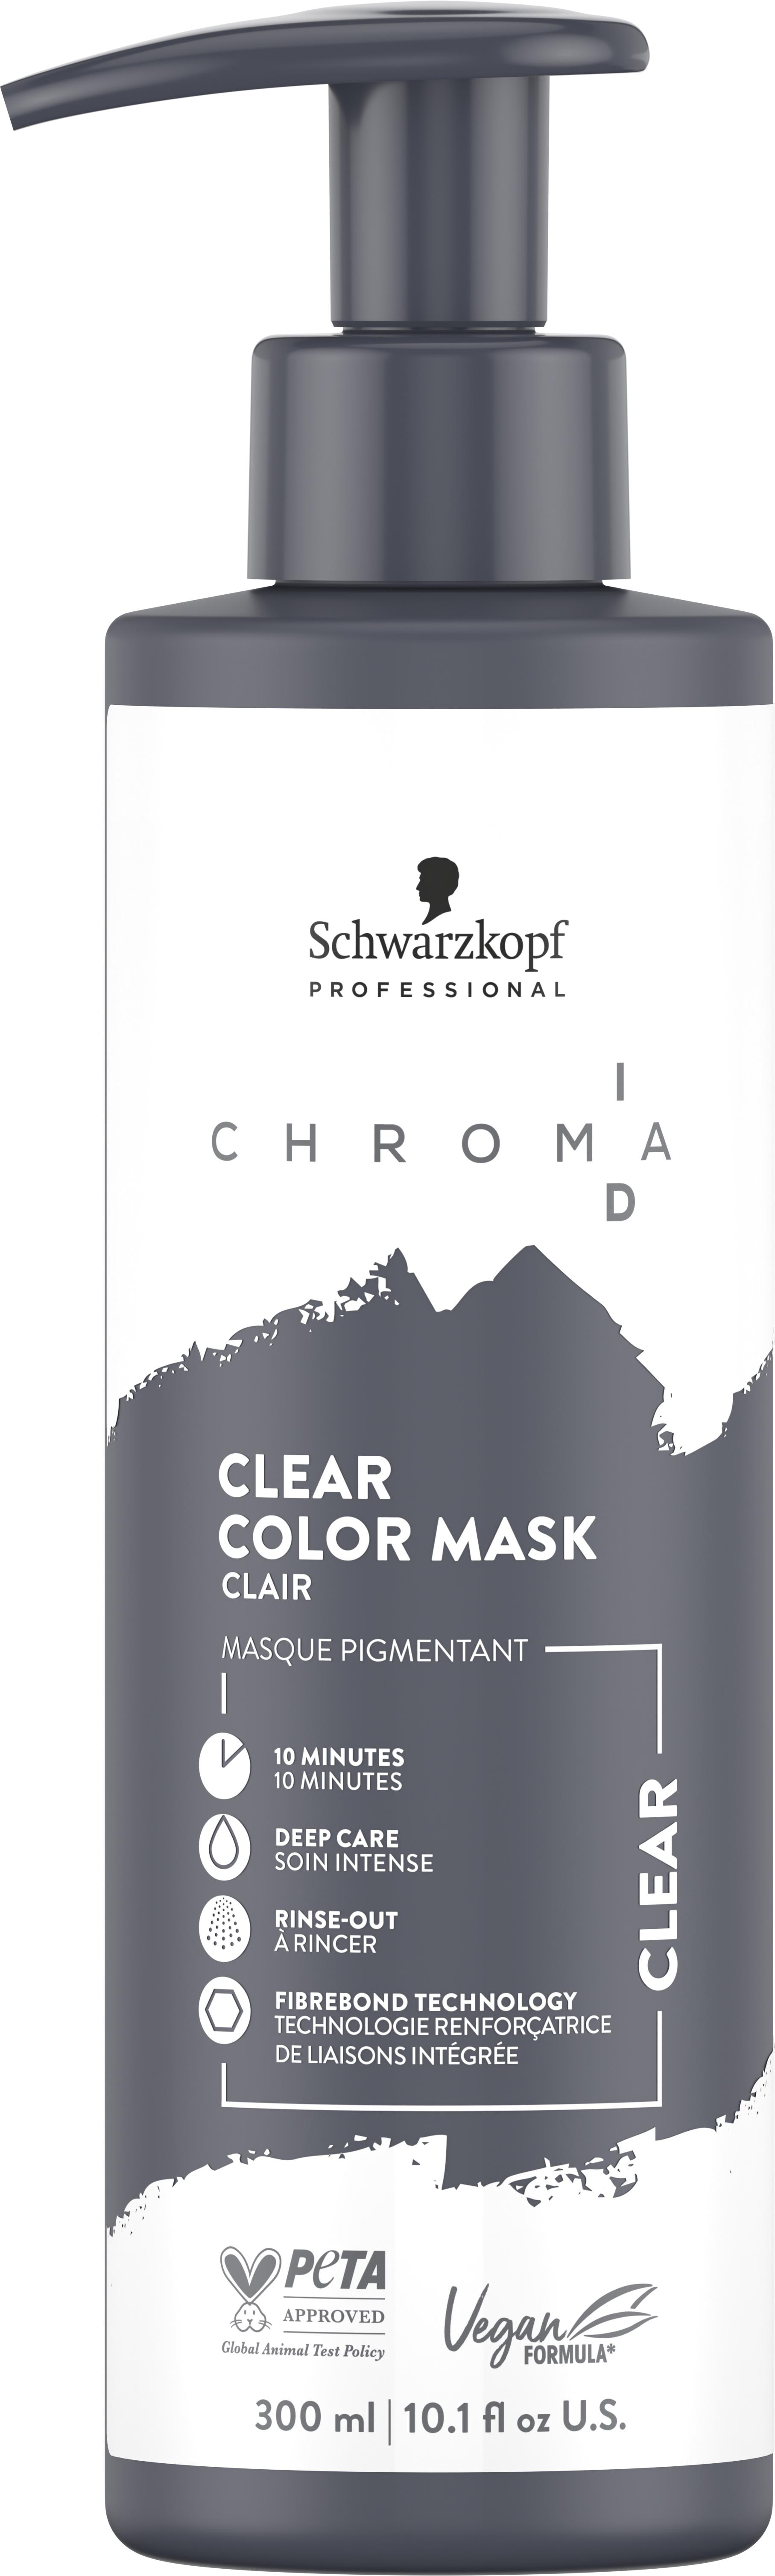 Chroma ID - Bonding Color Mask Clear